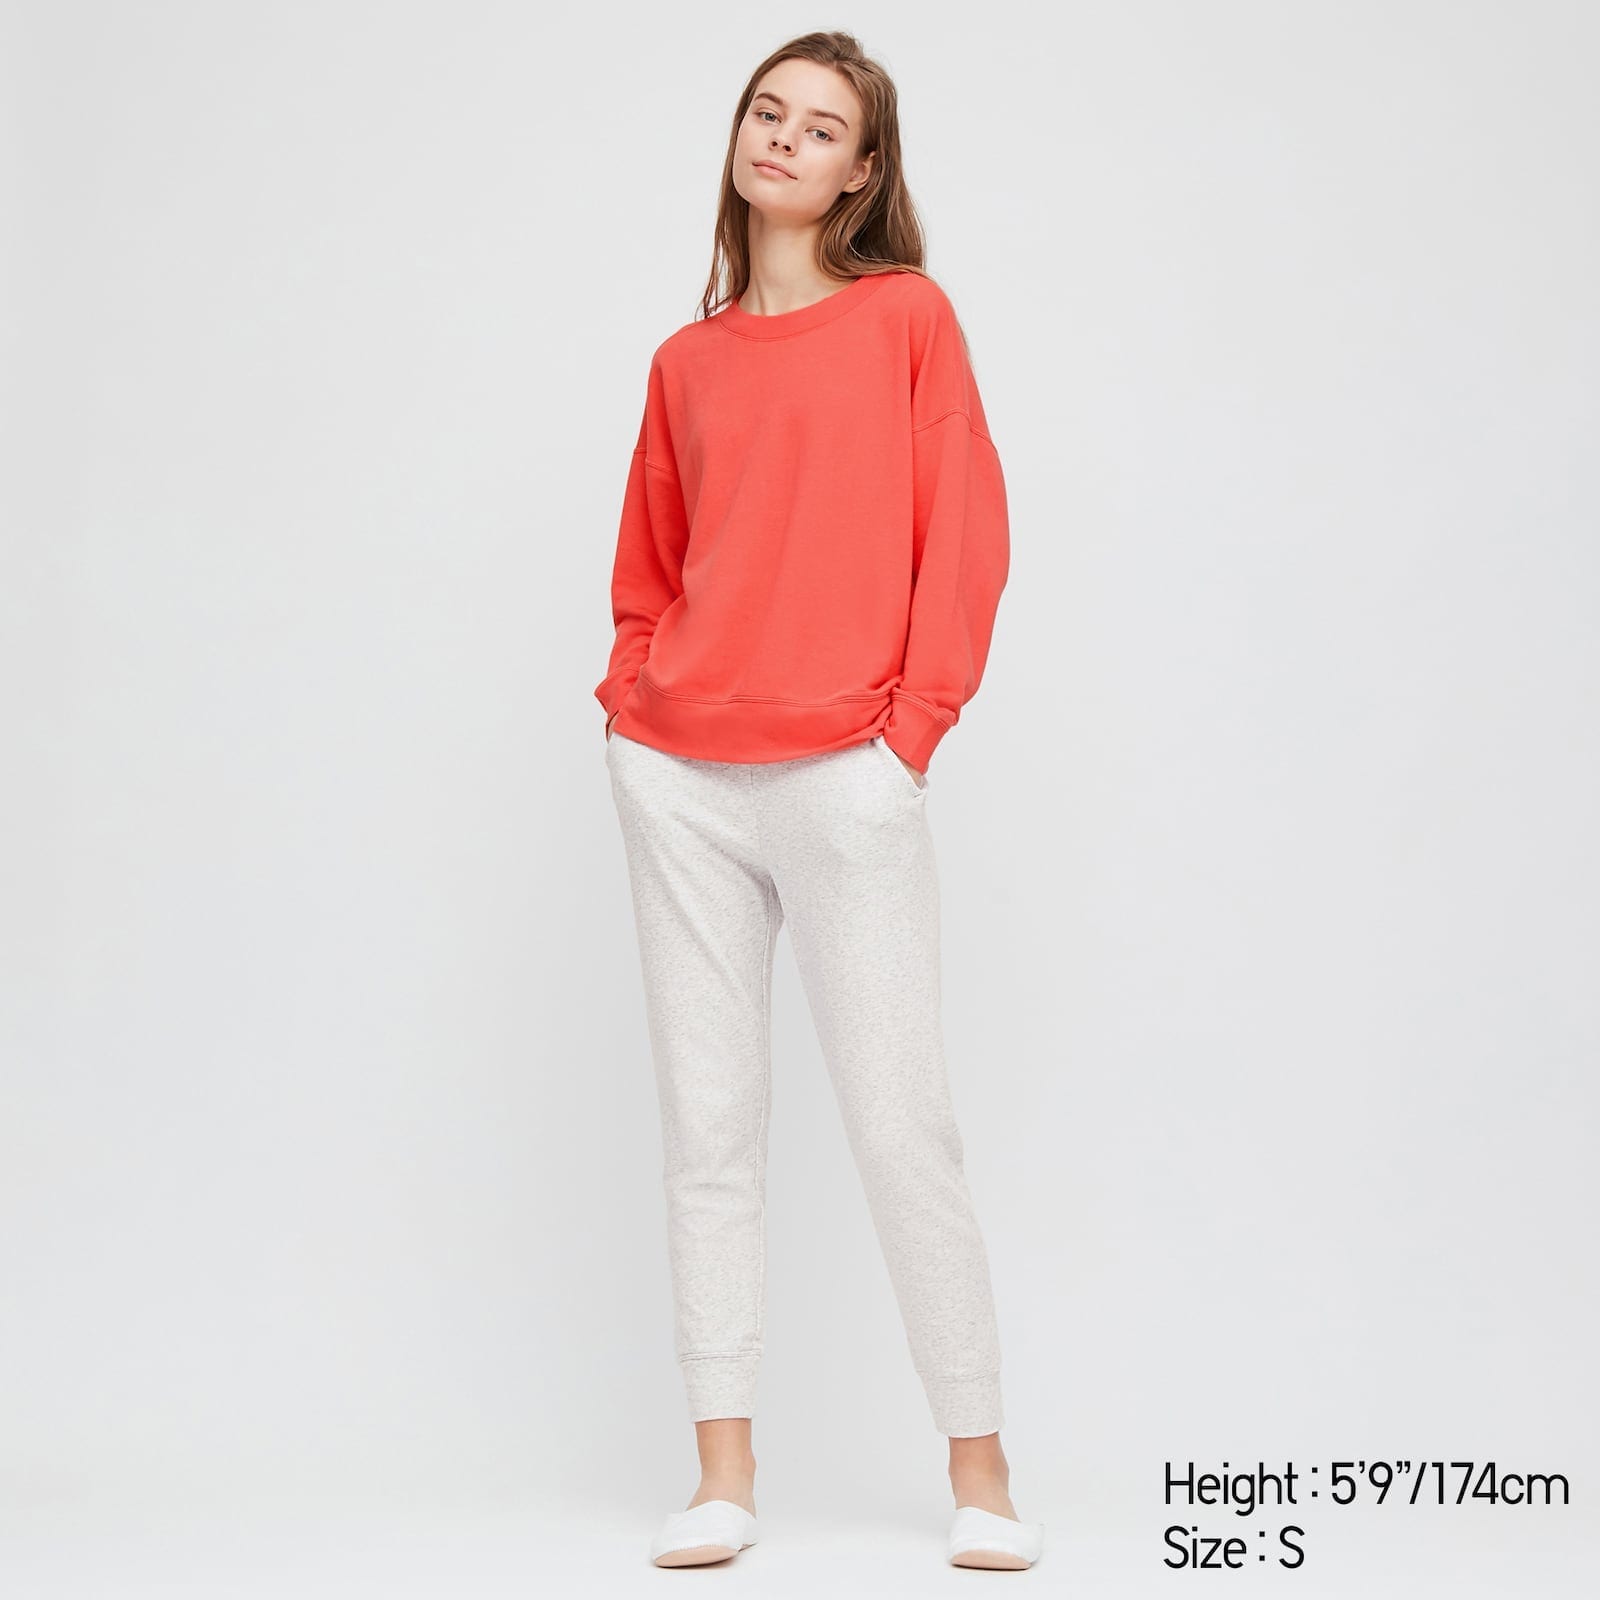 COVID-19: The Comfiest Loungewear Options To WFH